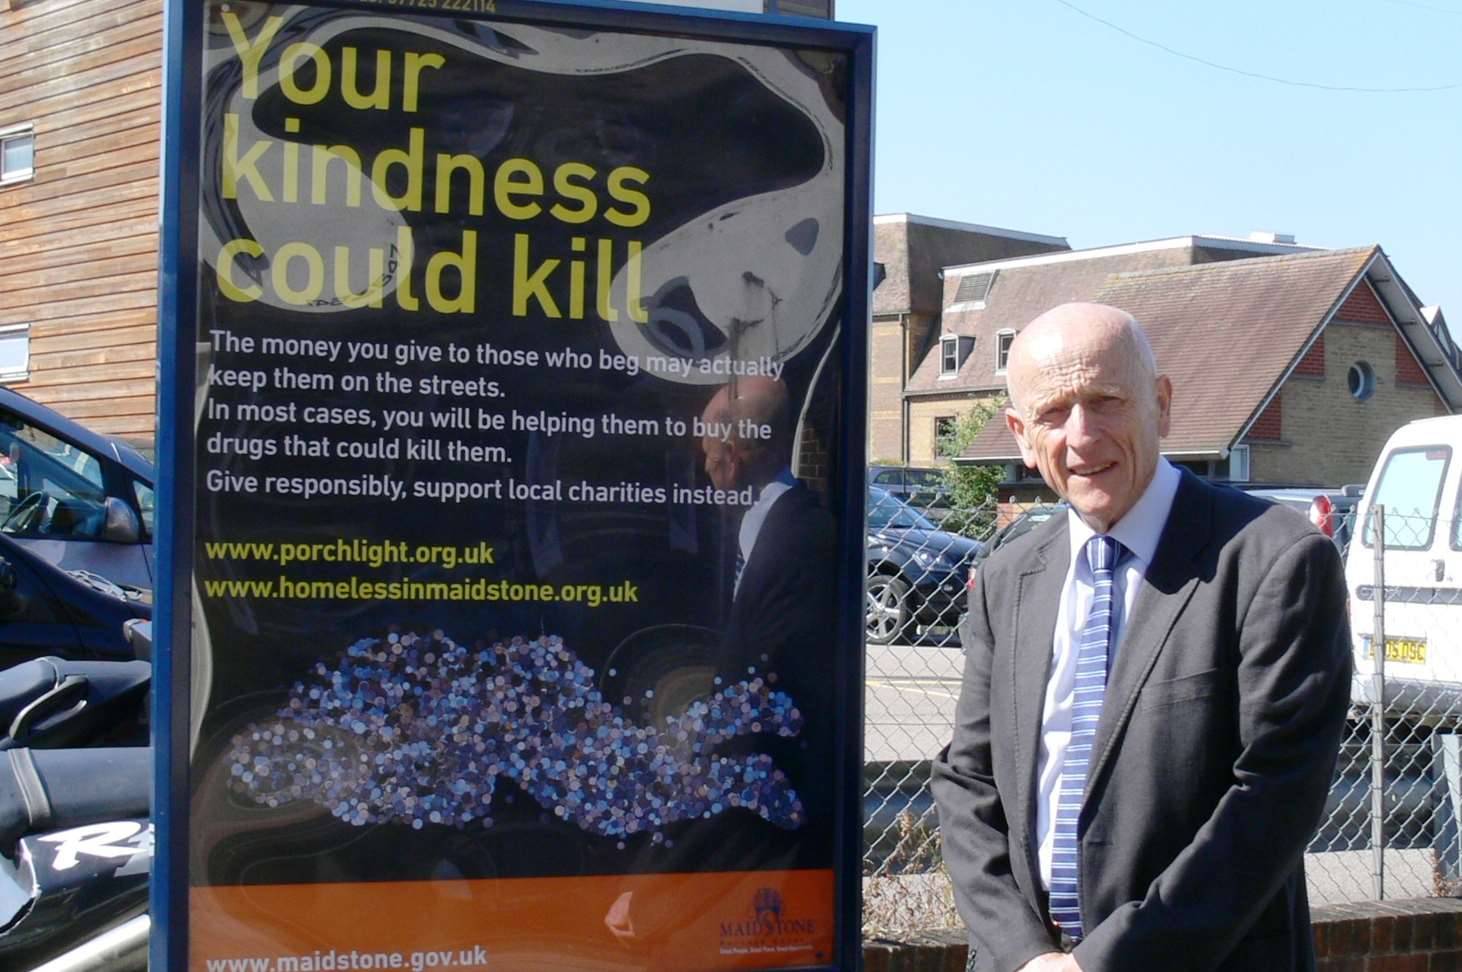 Cllr John A. Wilson with a poster promoting Maidstone Borough Council's Your Kindness Could Kill campaign